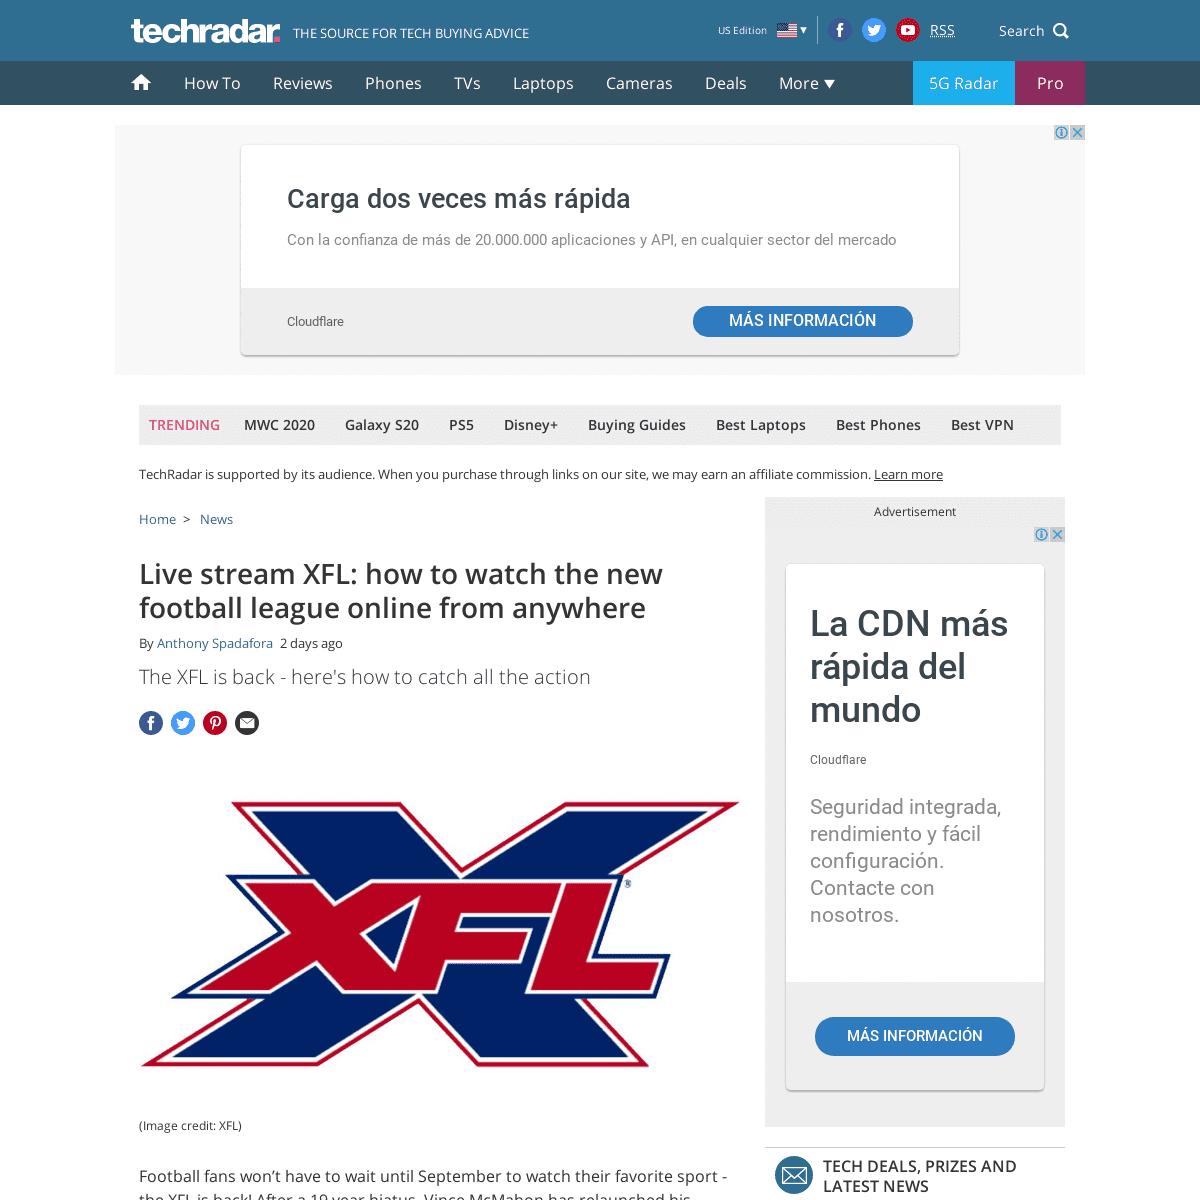 A complete backup of www.techradar.com/news/live-stream-xfl-how-to-watch-the-new-football-league-online-from-anywhere